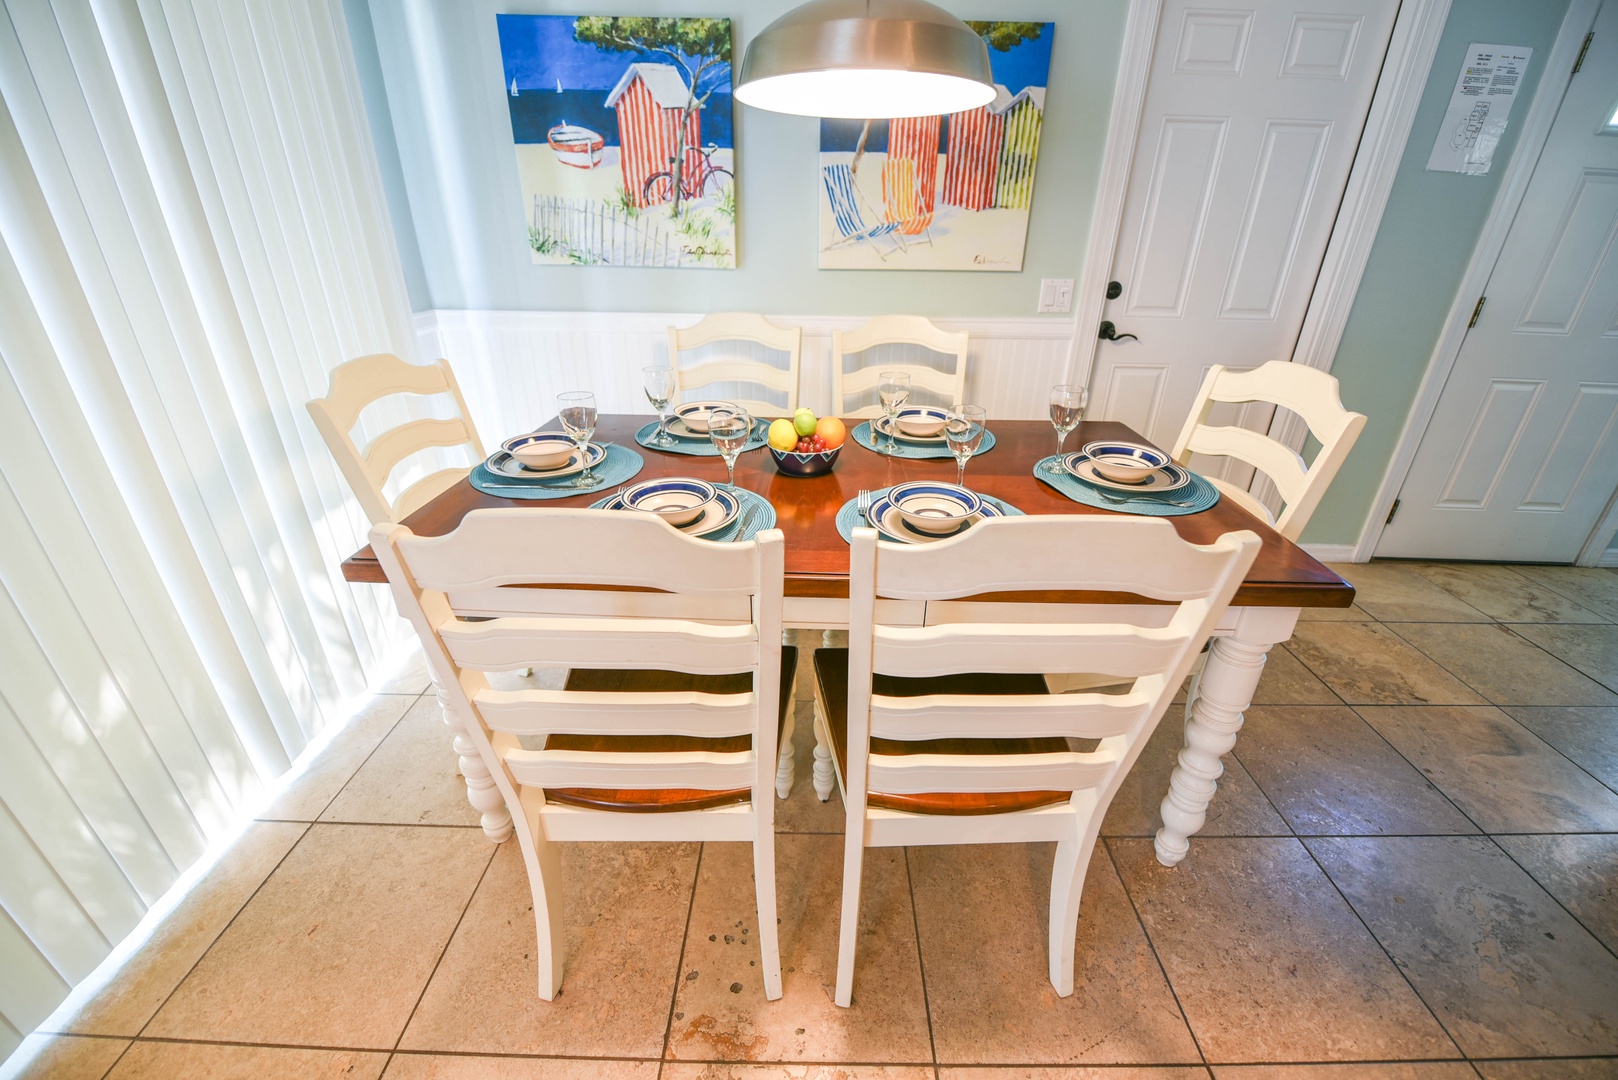 Dining Area for family meals